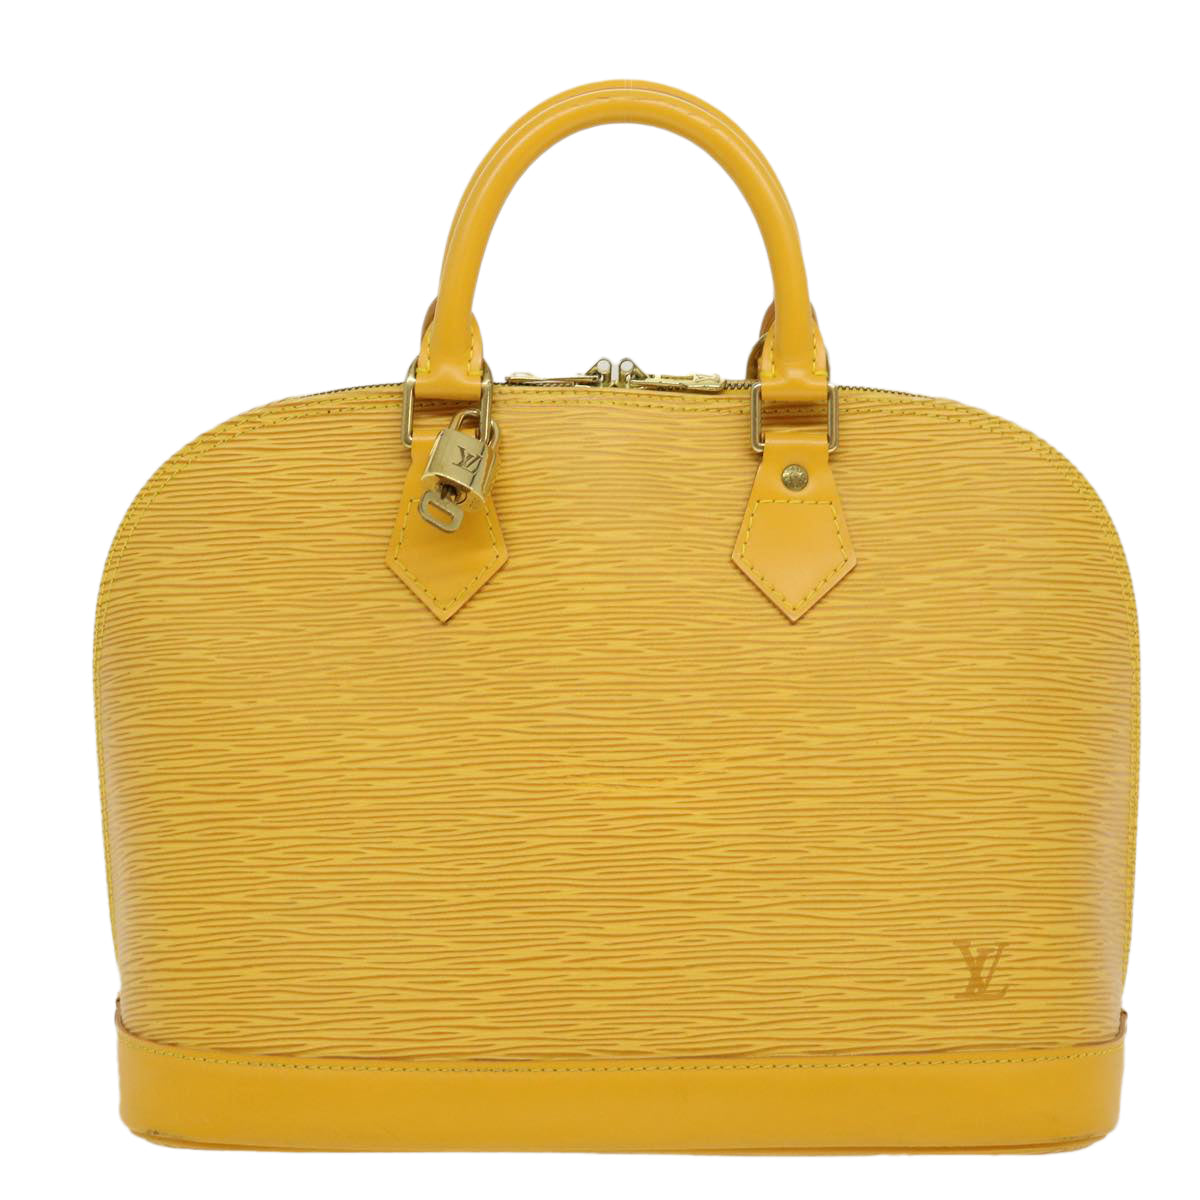 WB! Louis Vuitton 'Capucines BB Galet' Leather Top Handle Bag W